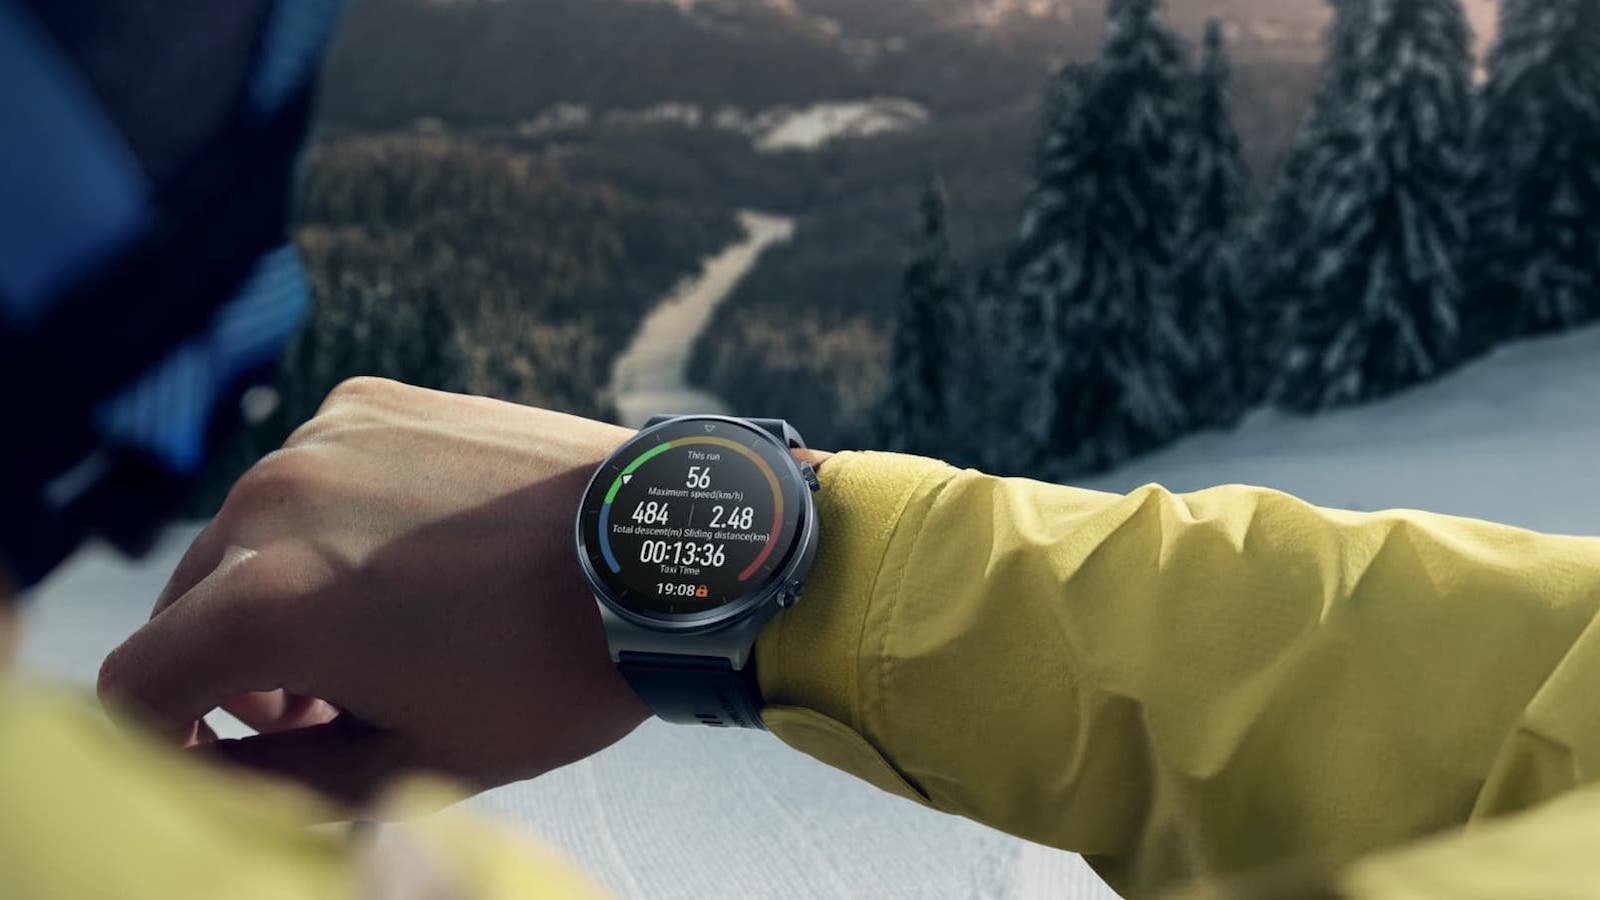 Huawei Watch GT 2 Pro has 100+ workout modes and a 2-week battery life